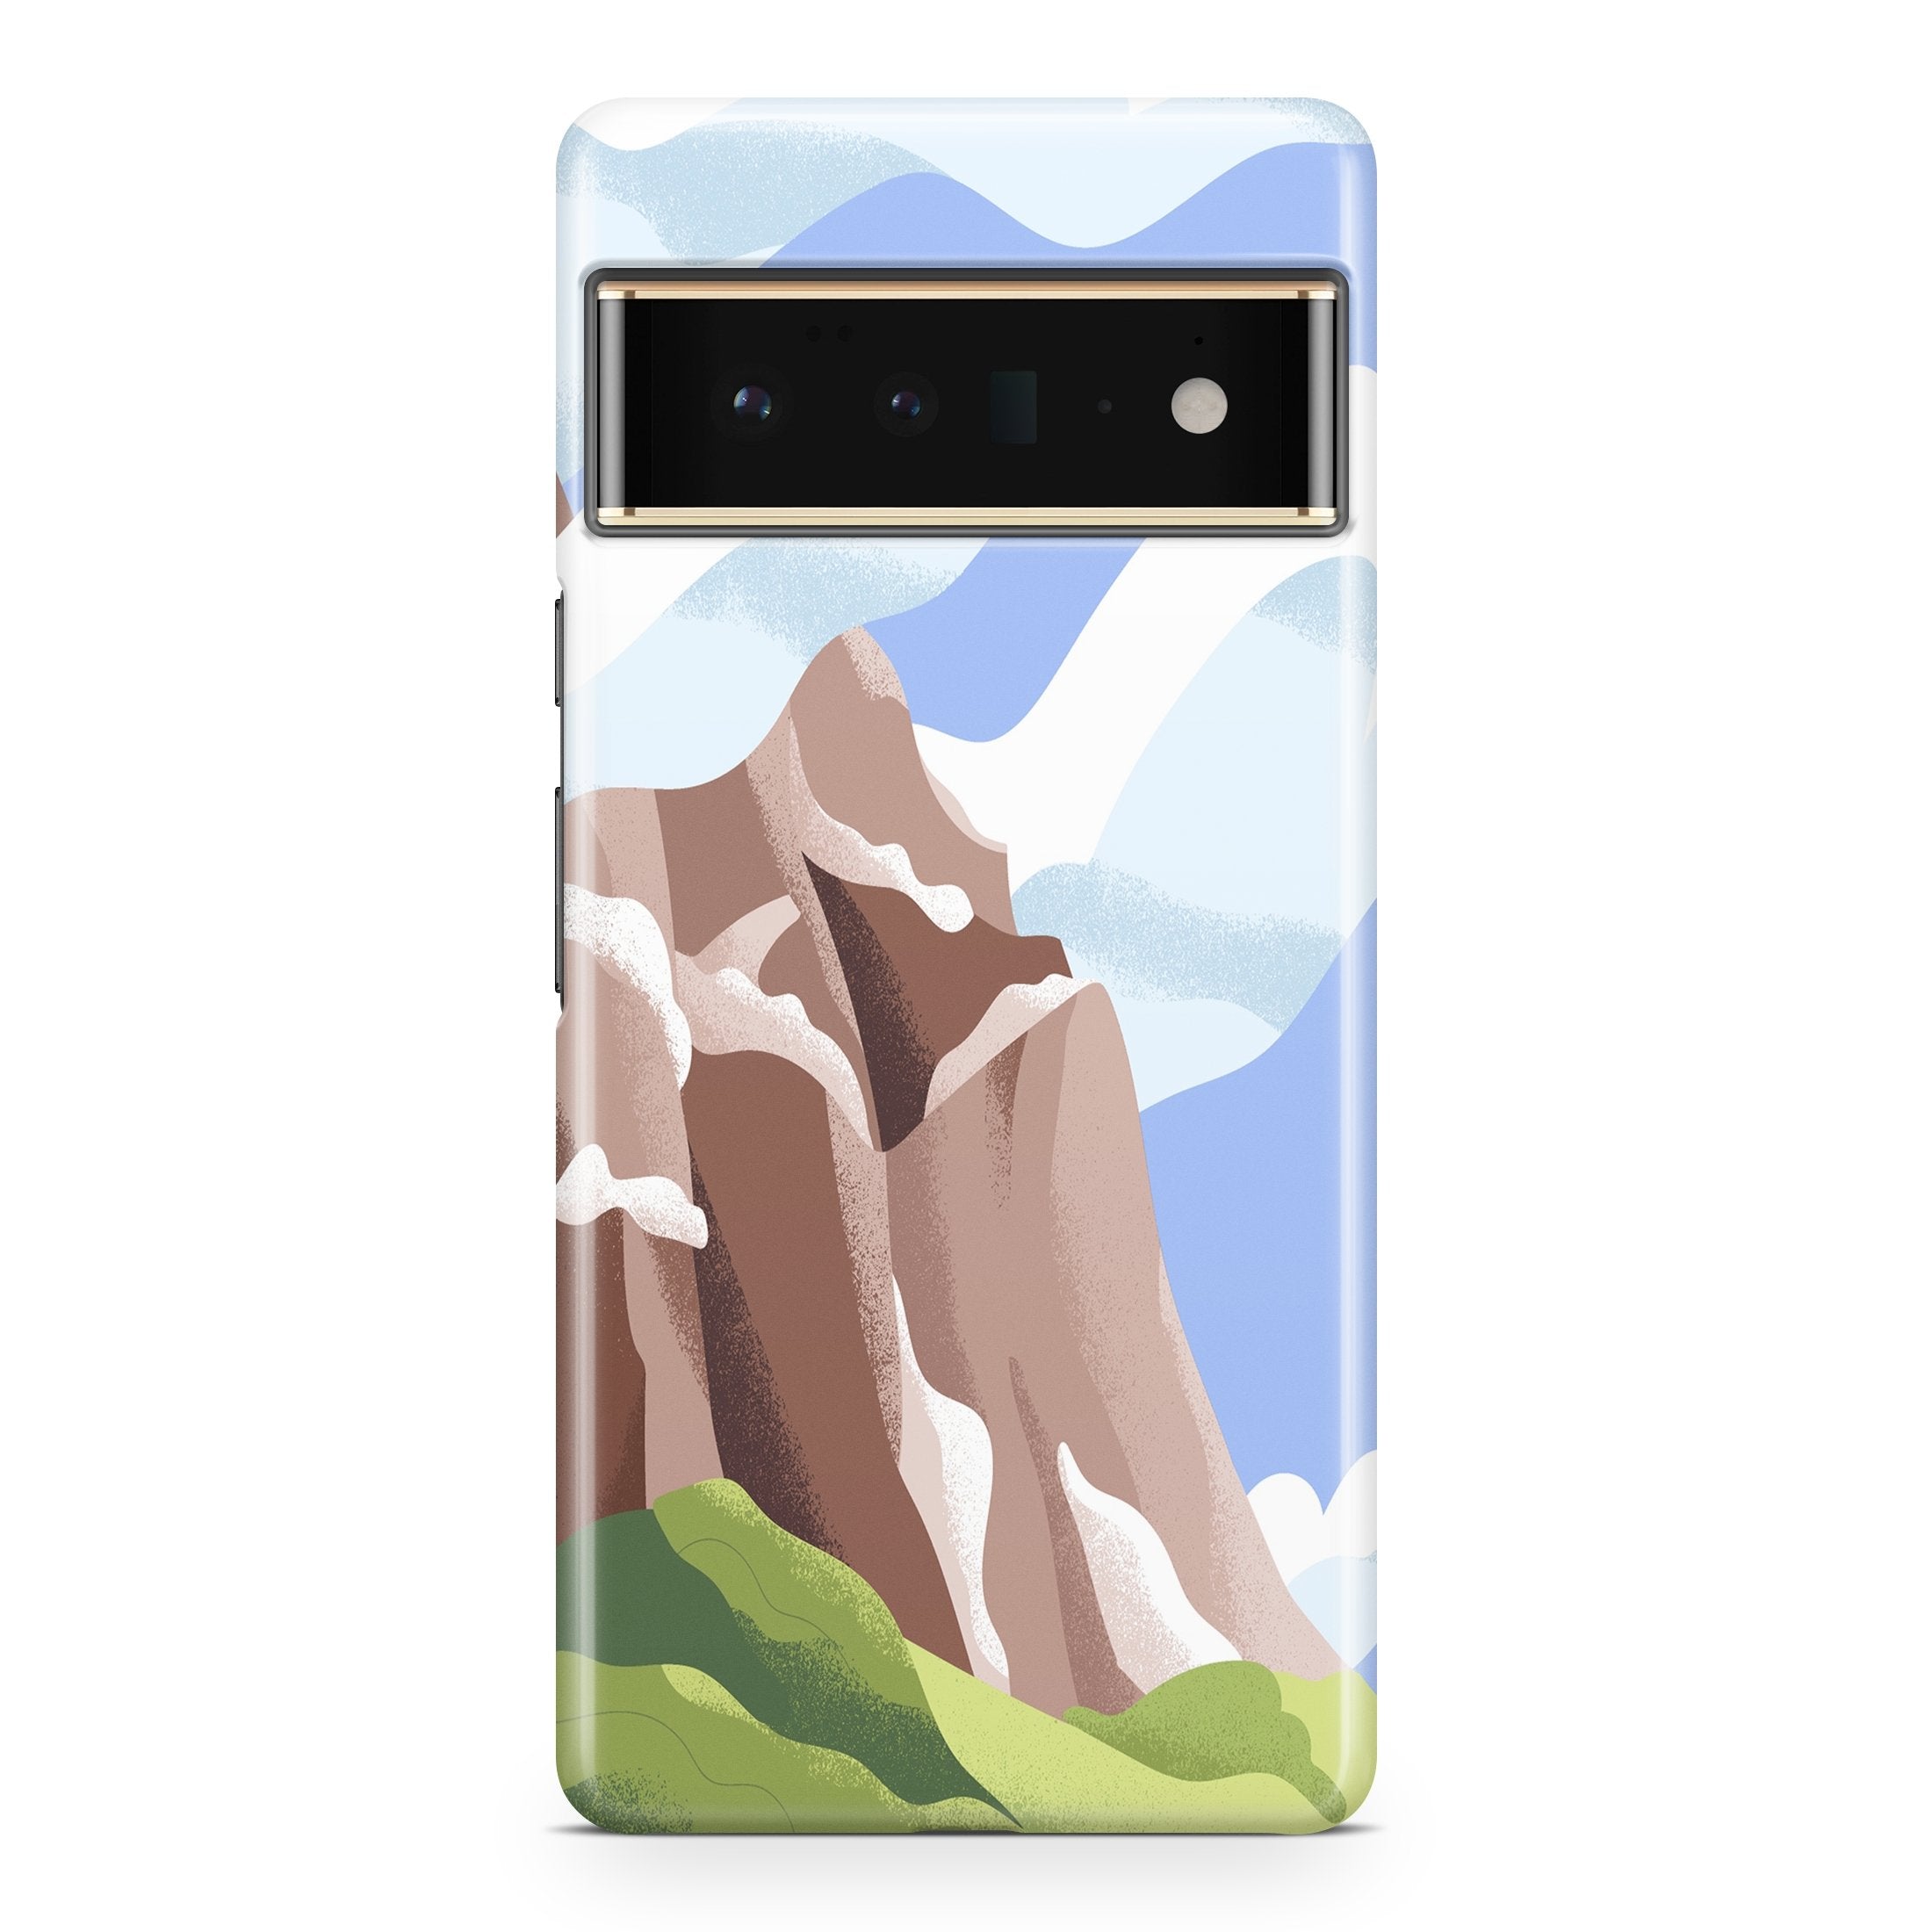 Watercolor Mountain - Google phone case designs by CaseSwagger